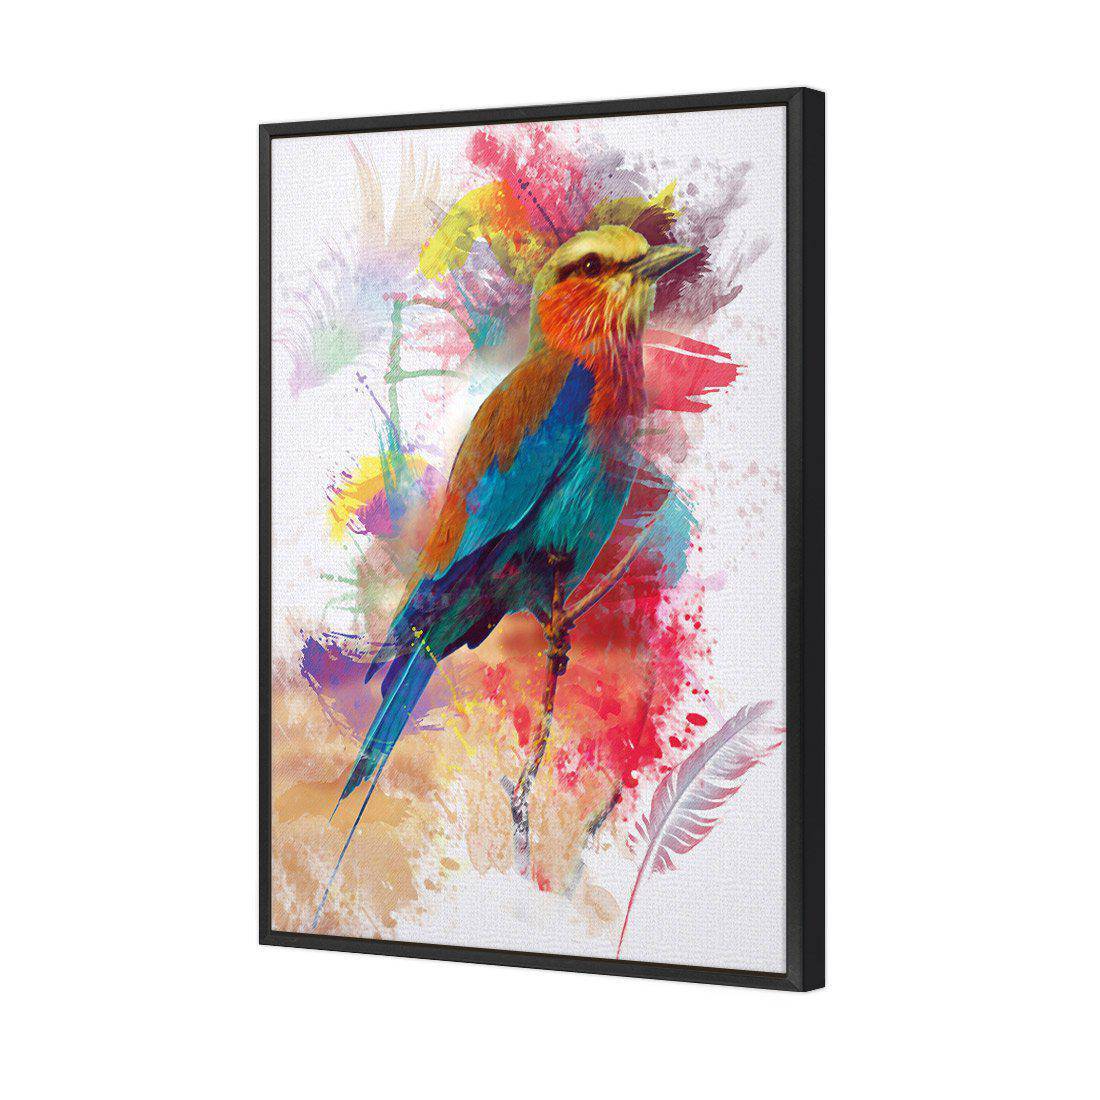 Painted Bird And Feathers Canvas Art-Canvas-Wall Art Designs-45x30cm-Canvas - Black Frame-Wall Art Designs